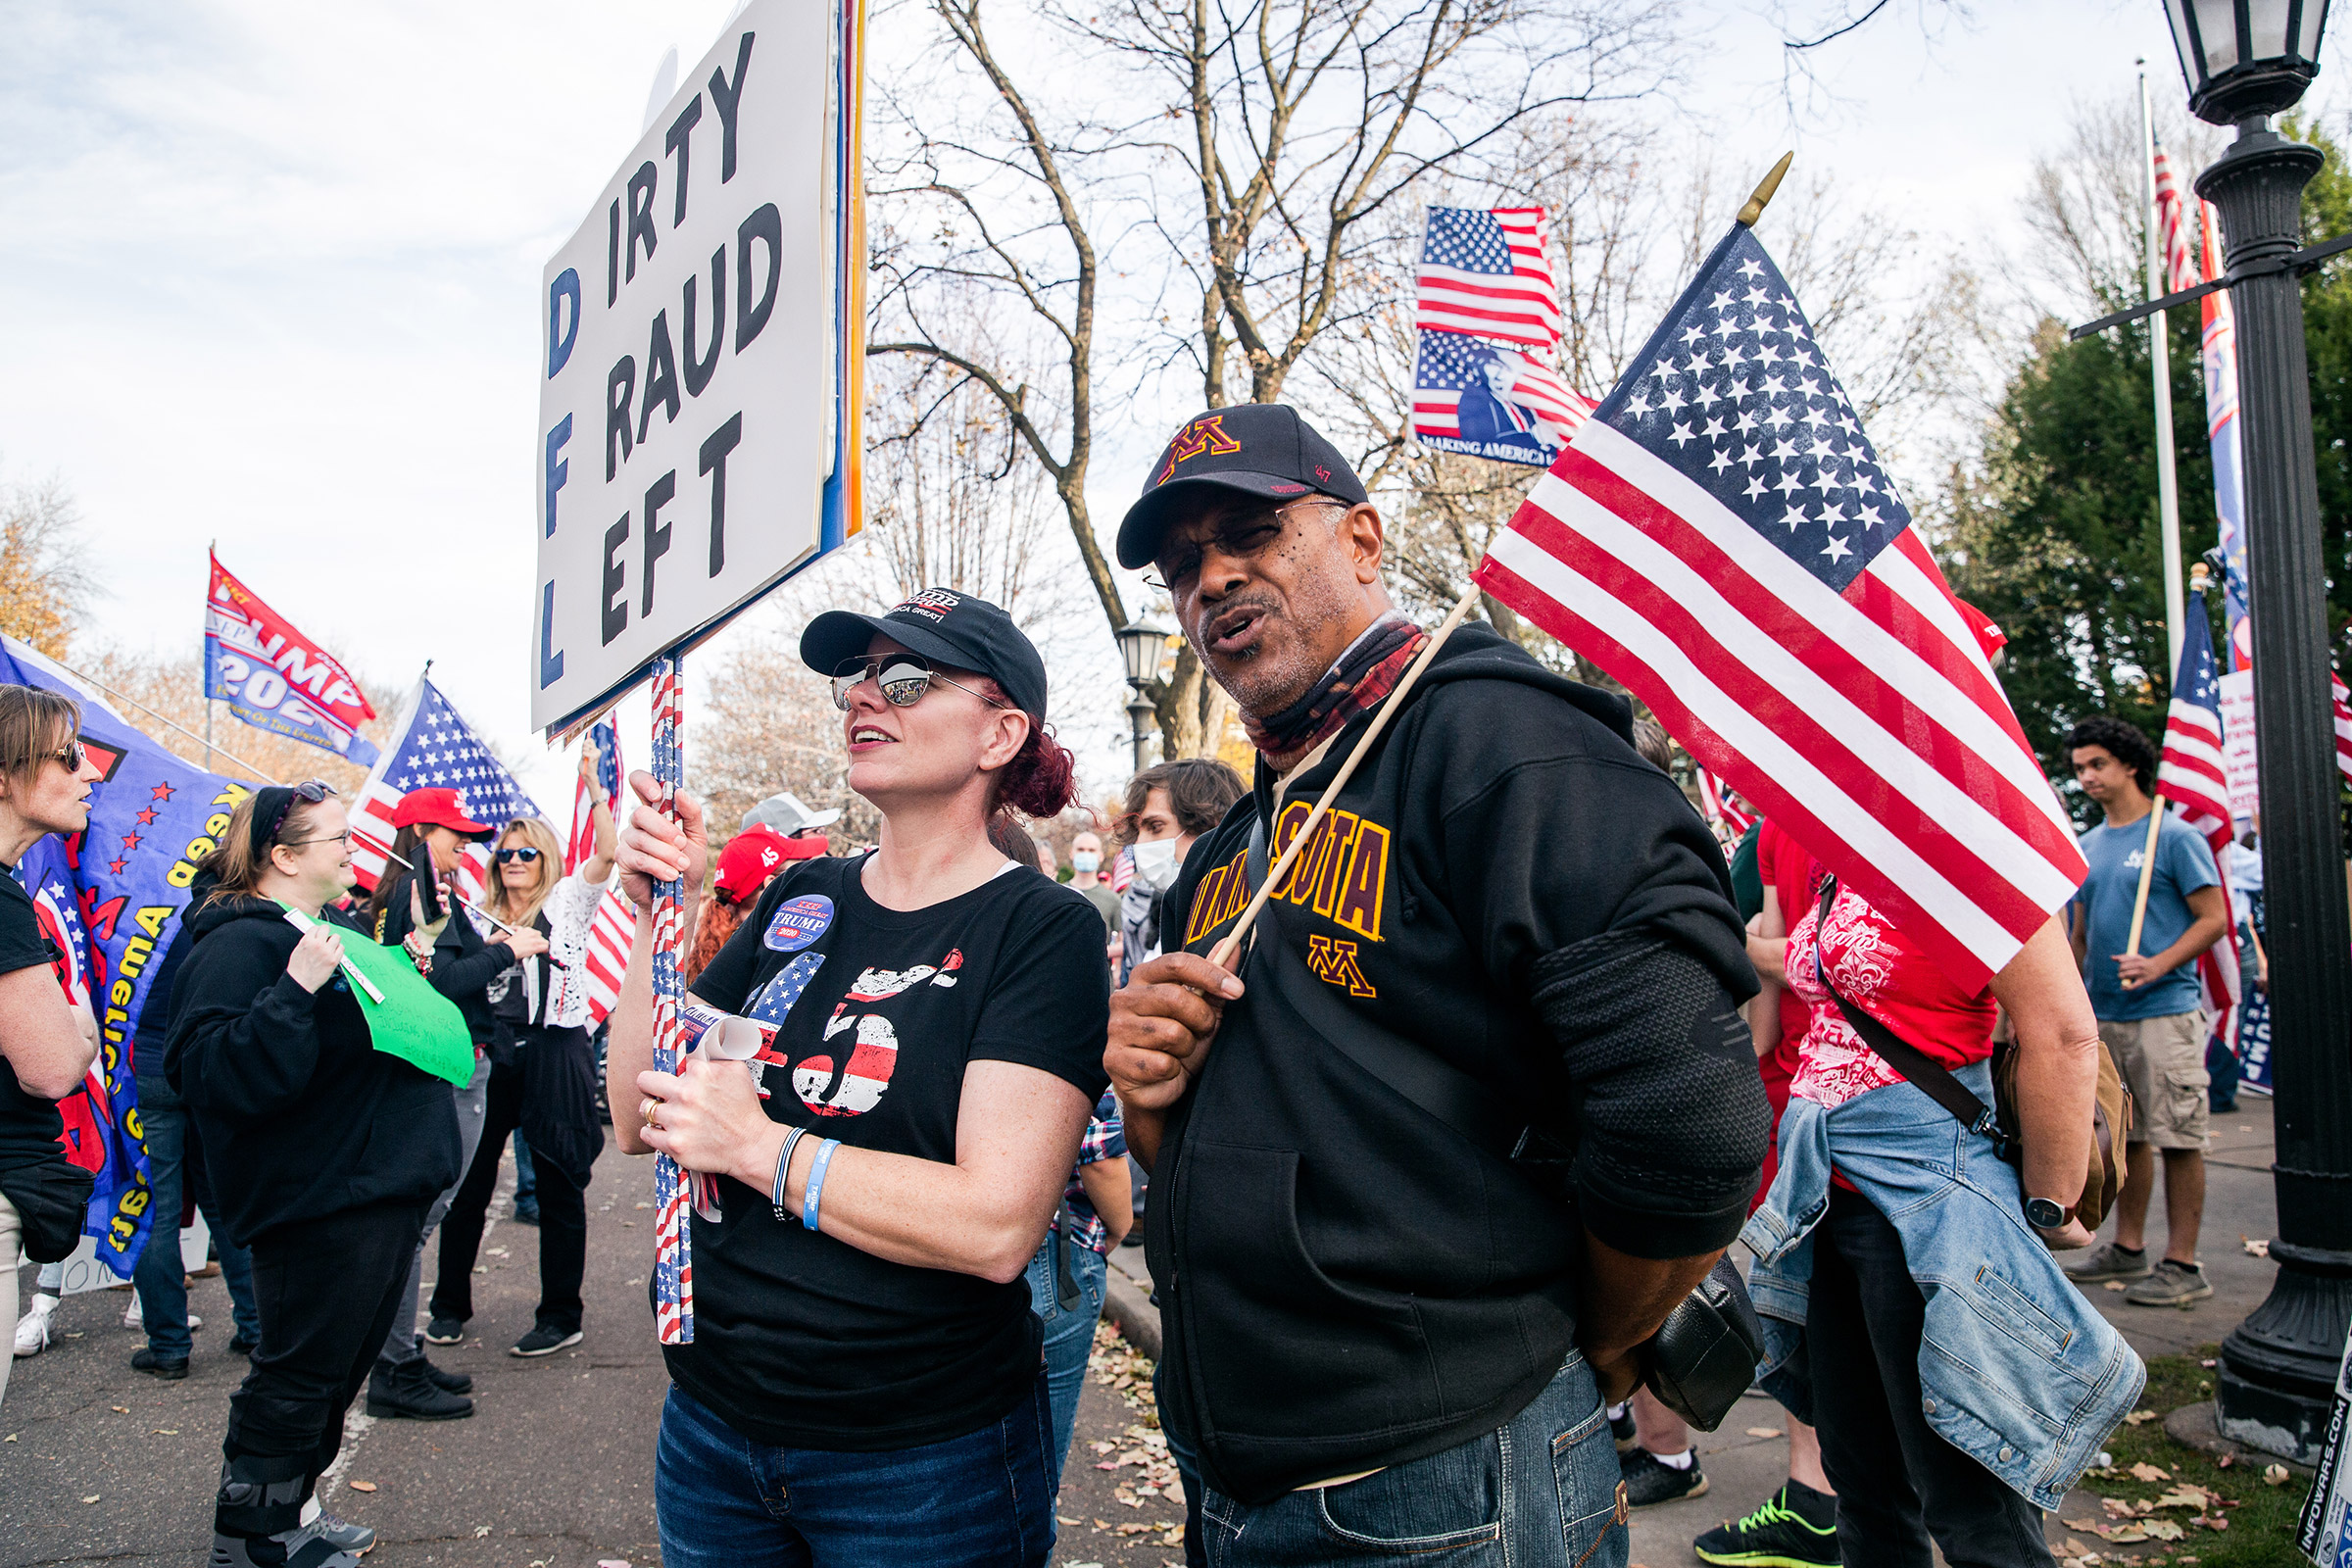 November 7th 2020- A Black Trump supporter is upset with having his photo taken at a protest in front of the Minnesota Governor's mansion in St. Paul Minnesota. Trump supporters are protesting the outcome of the  2020 presidential election.